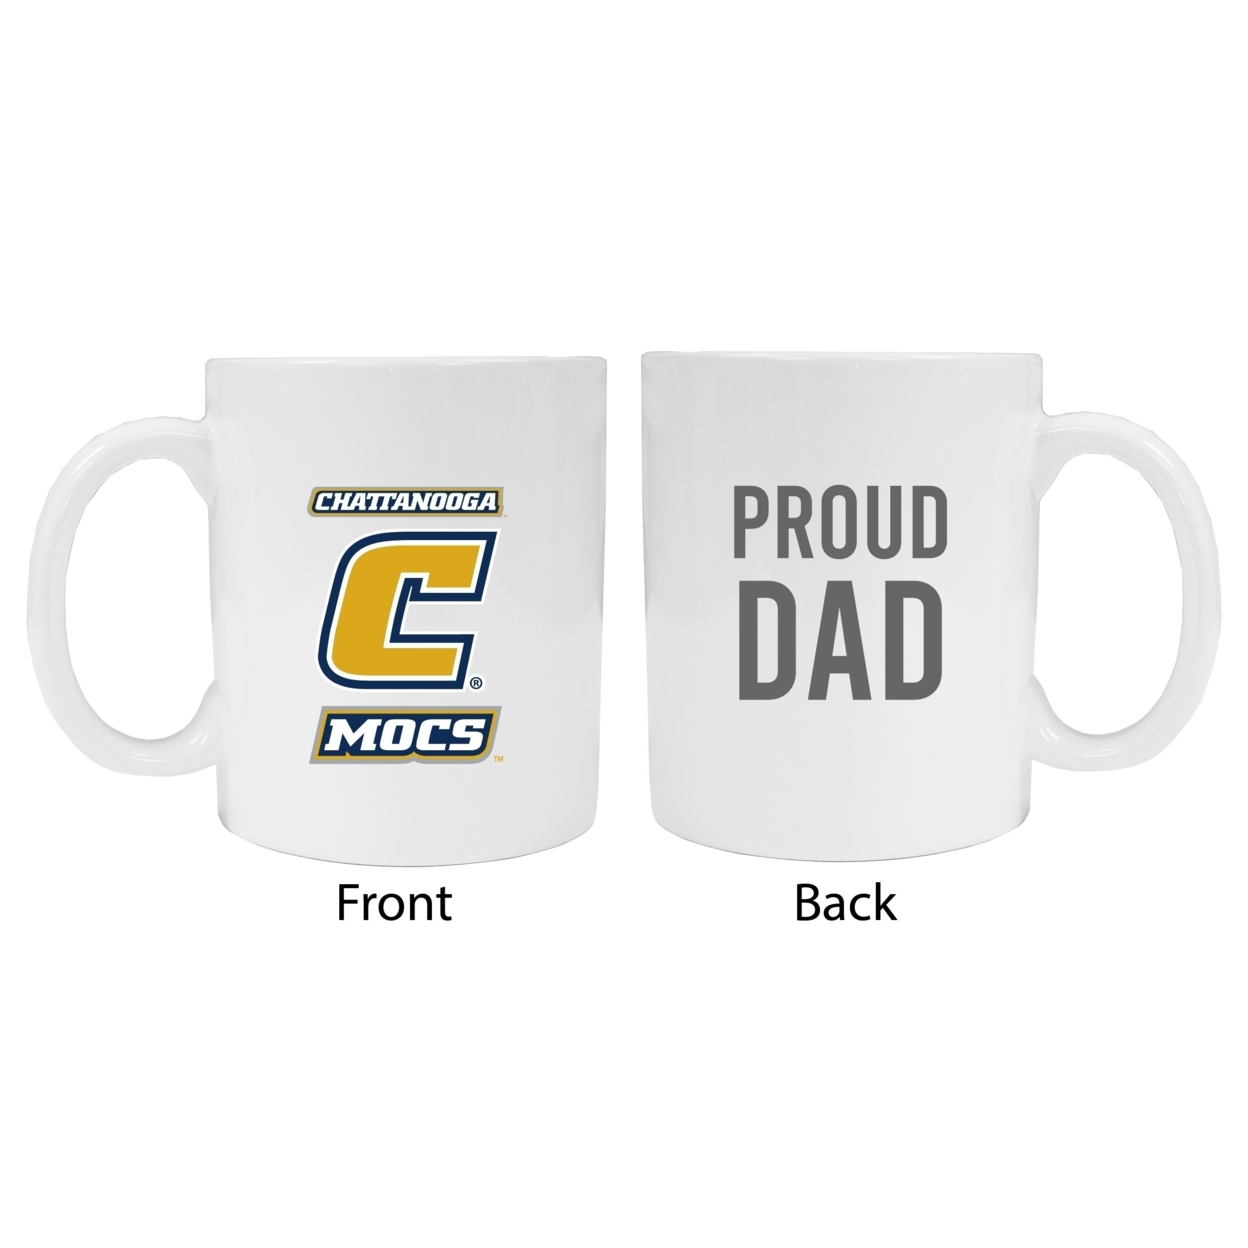 University Of Tennessee At Chattanooga Proud Dad Ceramic Coffee Mug - White